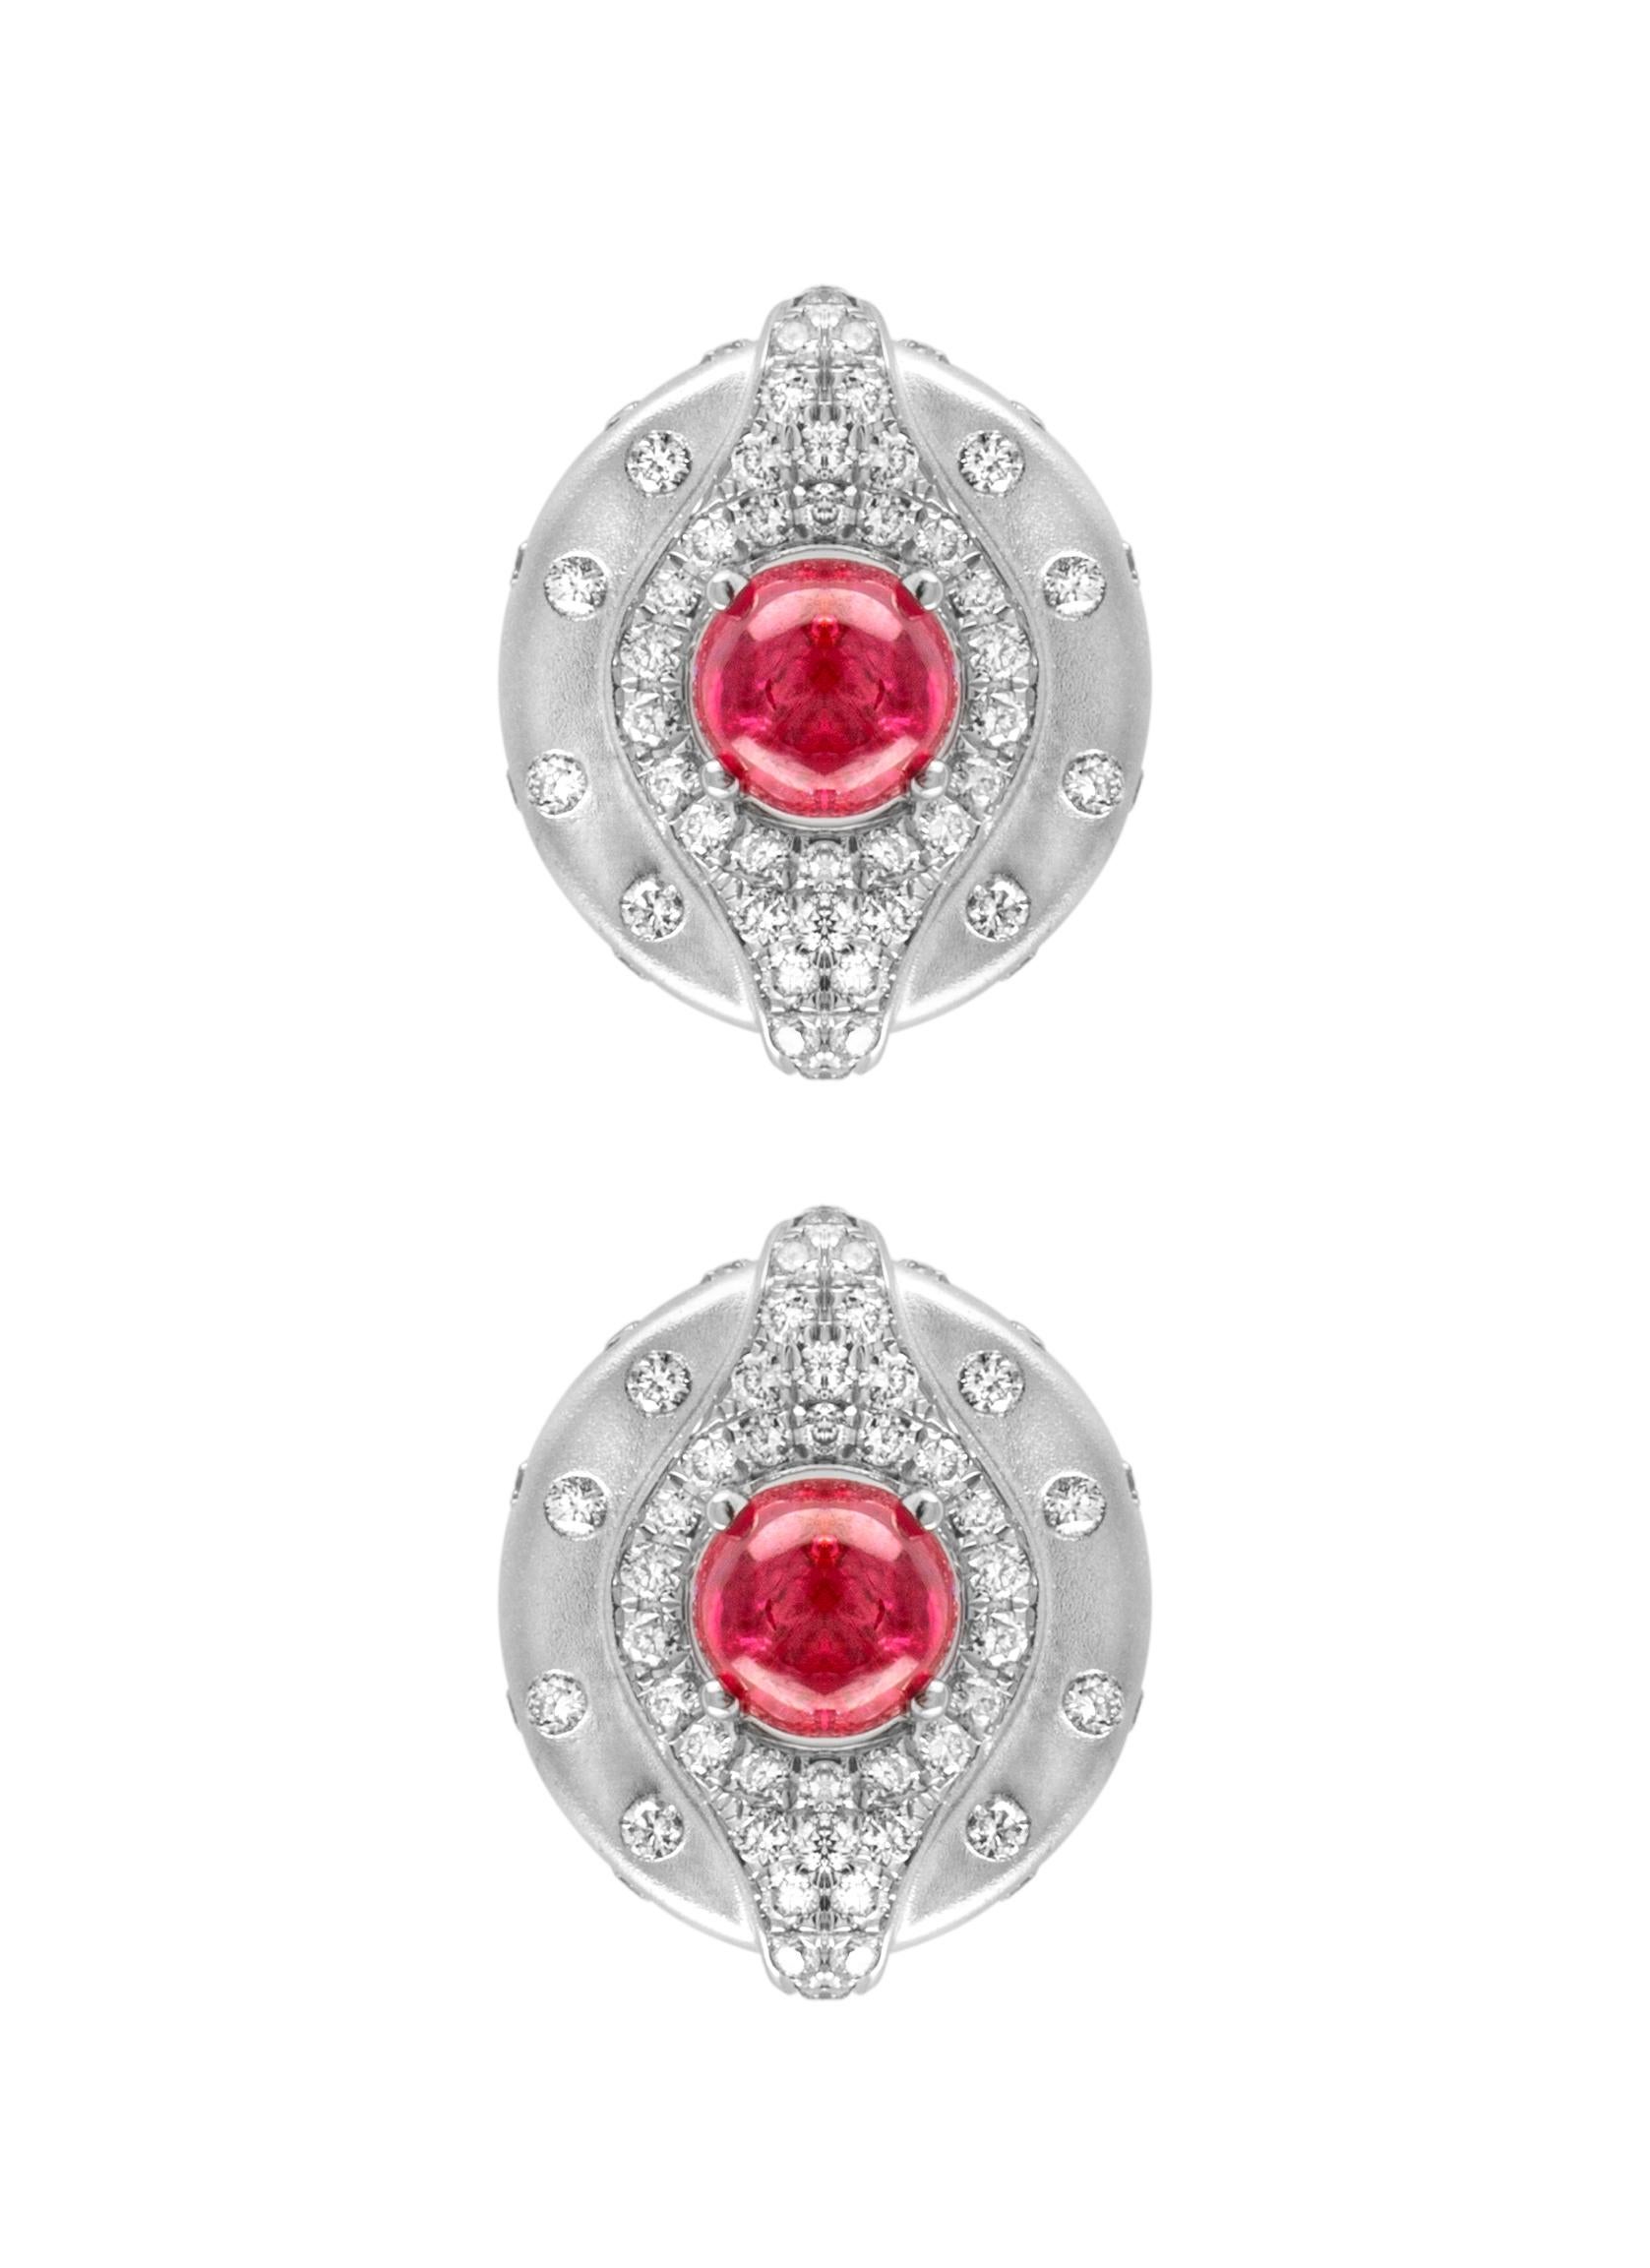 Contemporary 18 Karat White Gold Spinel and Diamond Stud Earrings For Sale